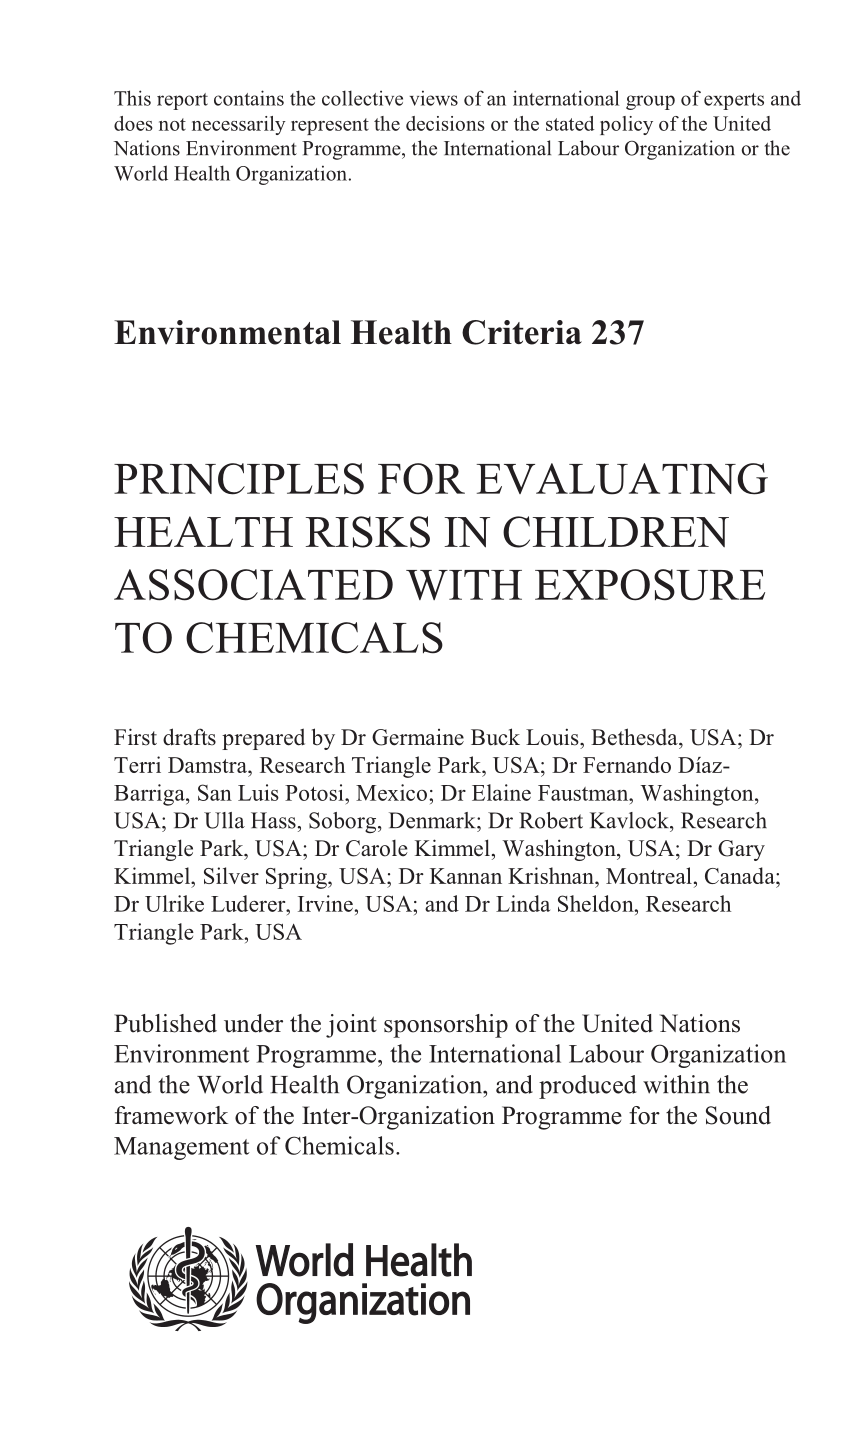 PDF) Environmental Health Criteria 237 Principles for Evaluating Health Risks in Children Associated with Exposure to Chemicals pic